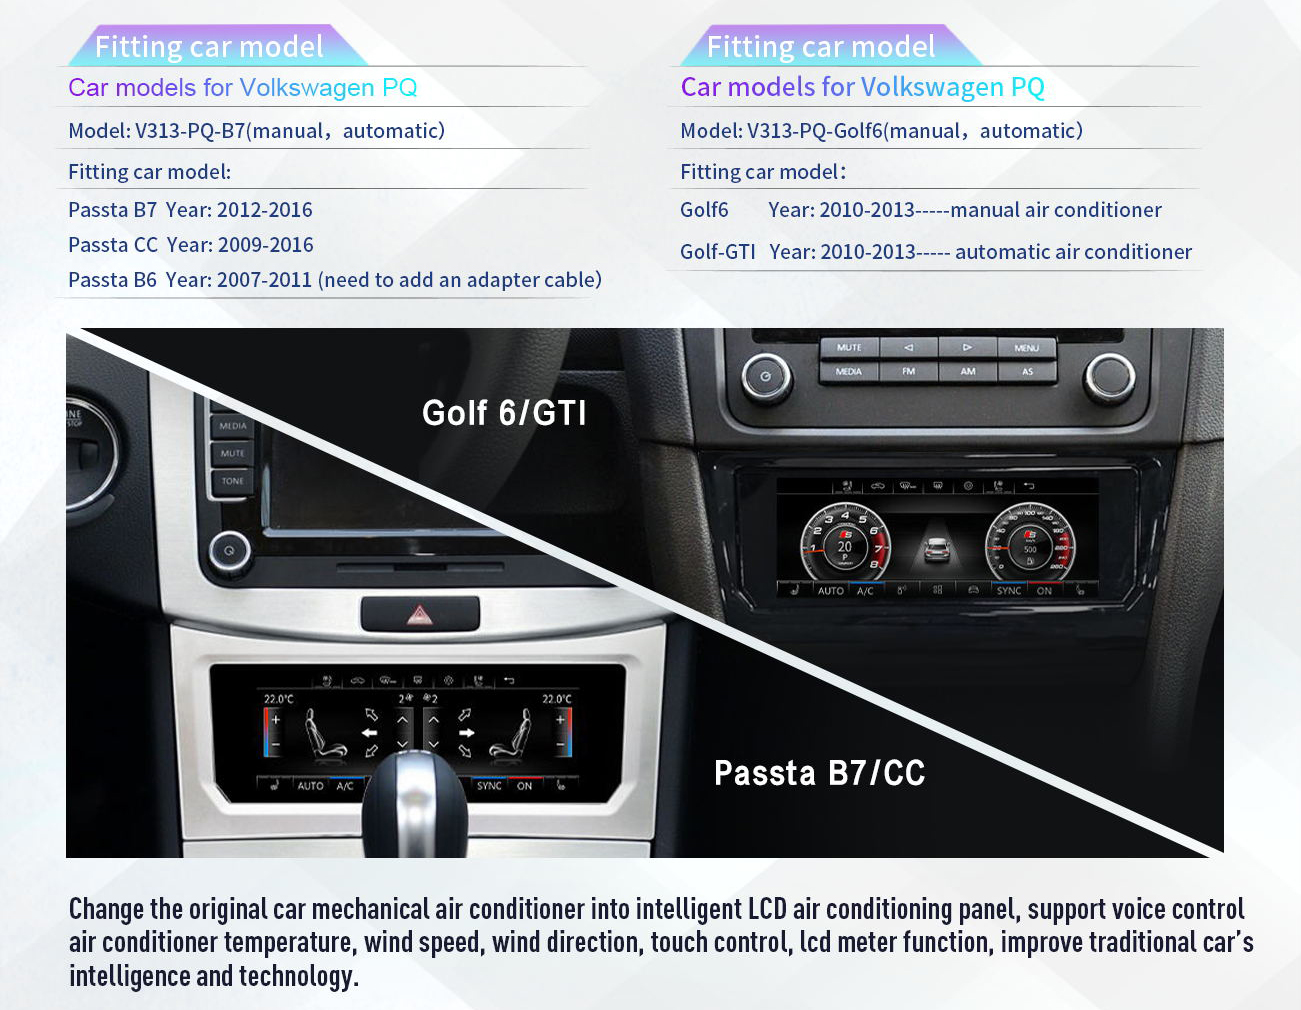 Step-by-Step Installation Guide for Your VW Golf Climate Control Unit